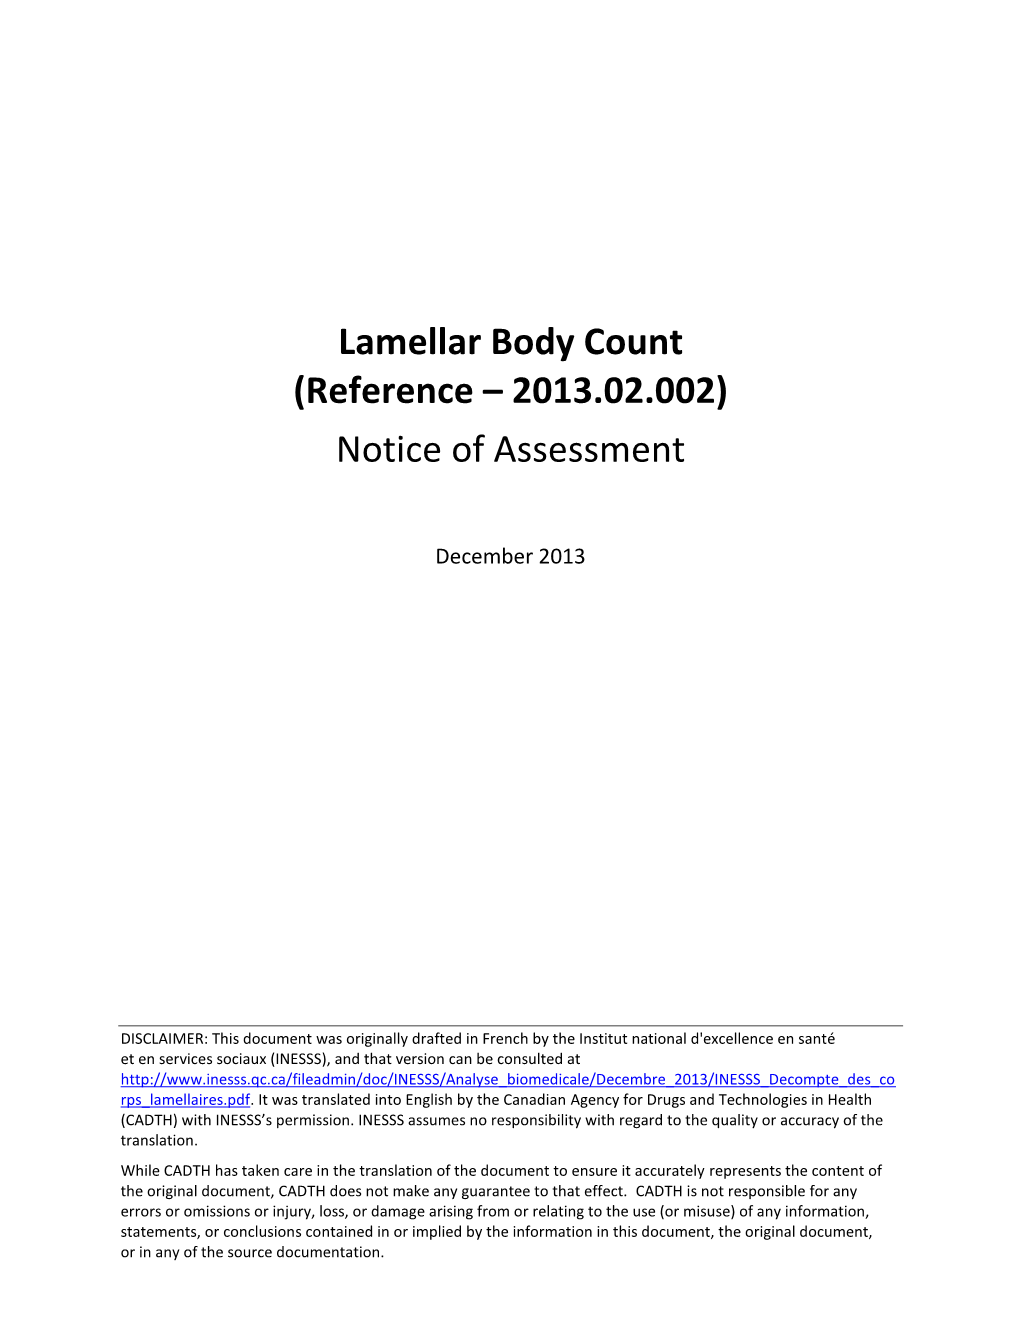 Lamellar Body Count (Reference – 2013.02.002) Notice of Assessment